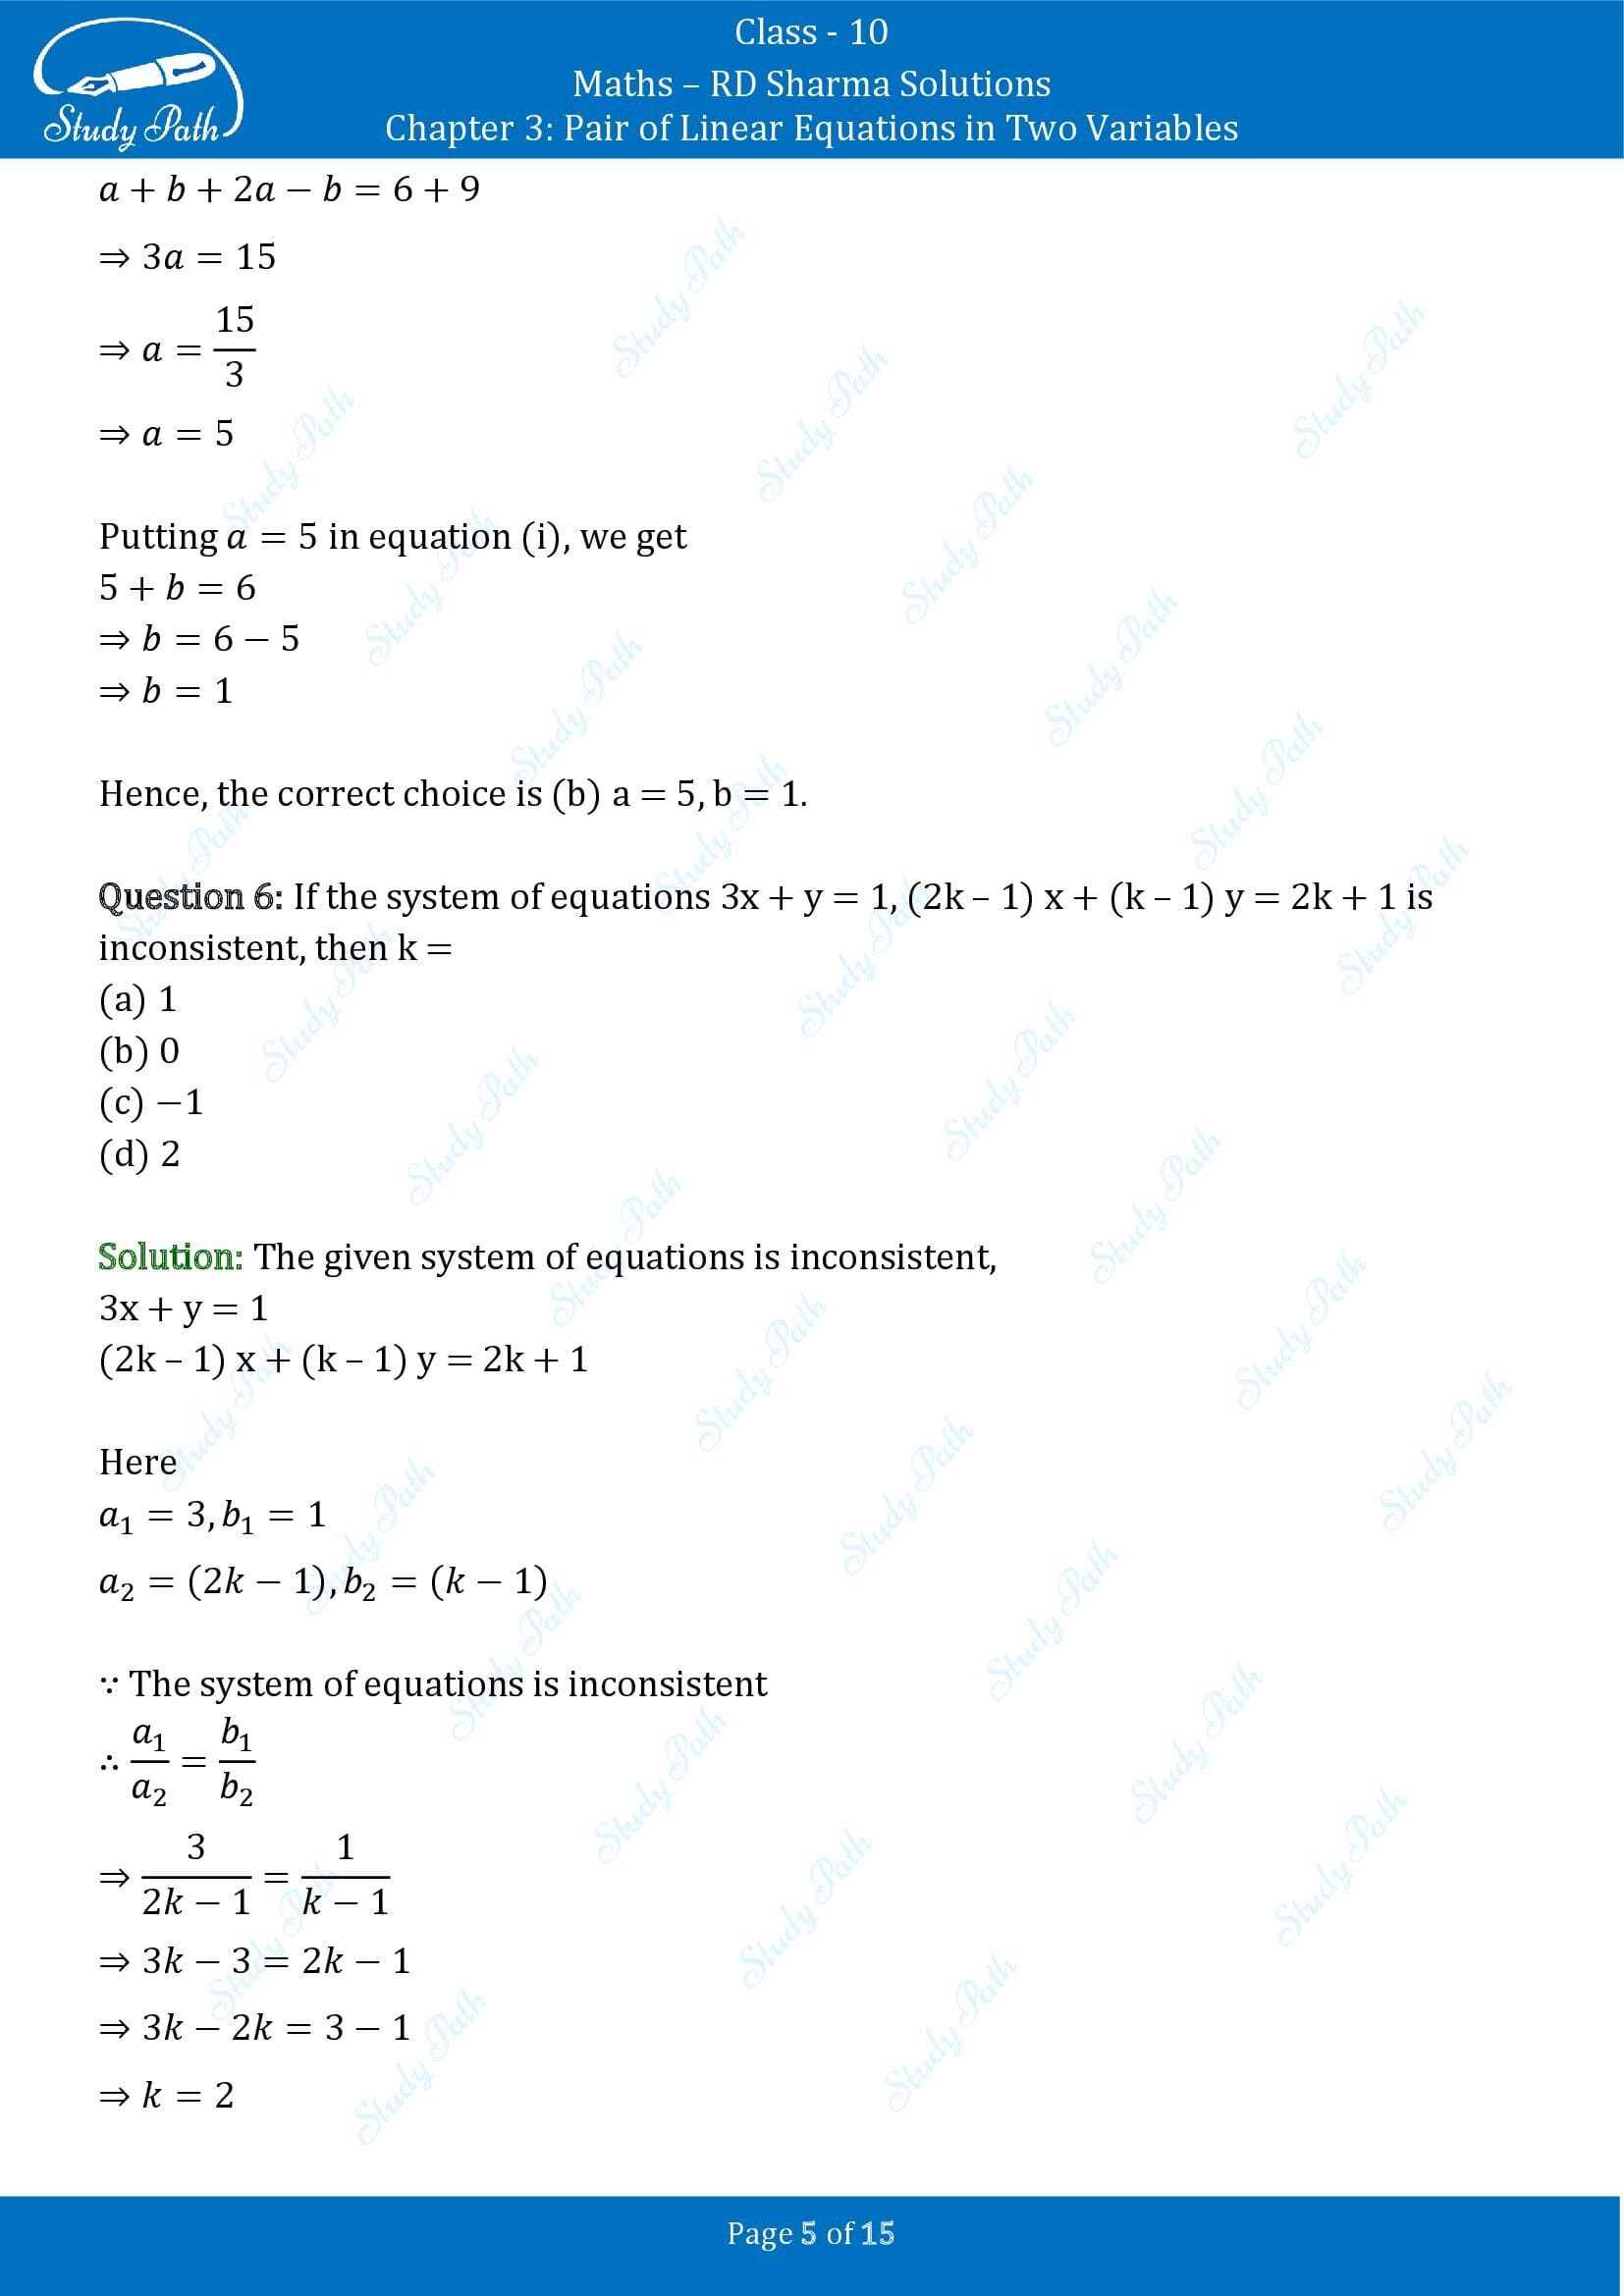 RD Sharma Solutions Class 10 Chapter 3 Pair of Linear Equations in Two Variables Multiple Choice Questions MCQs 00005